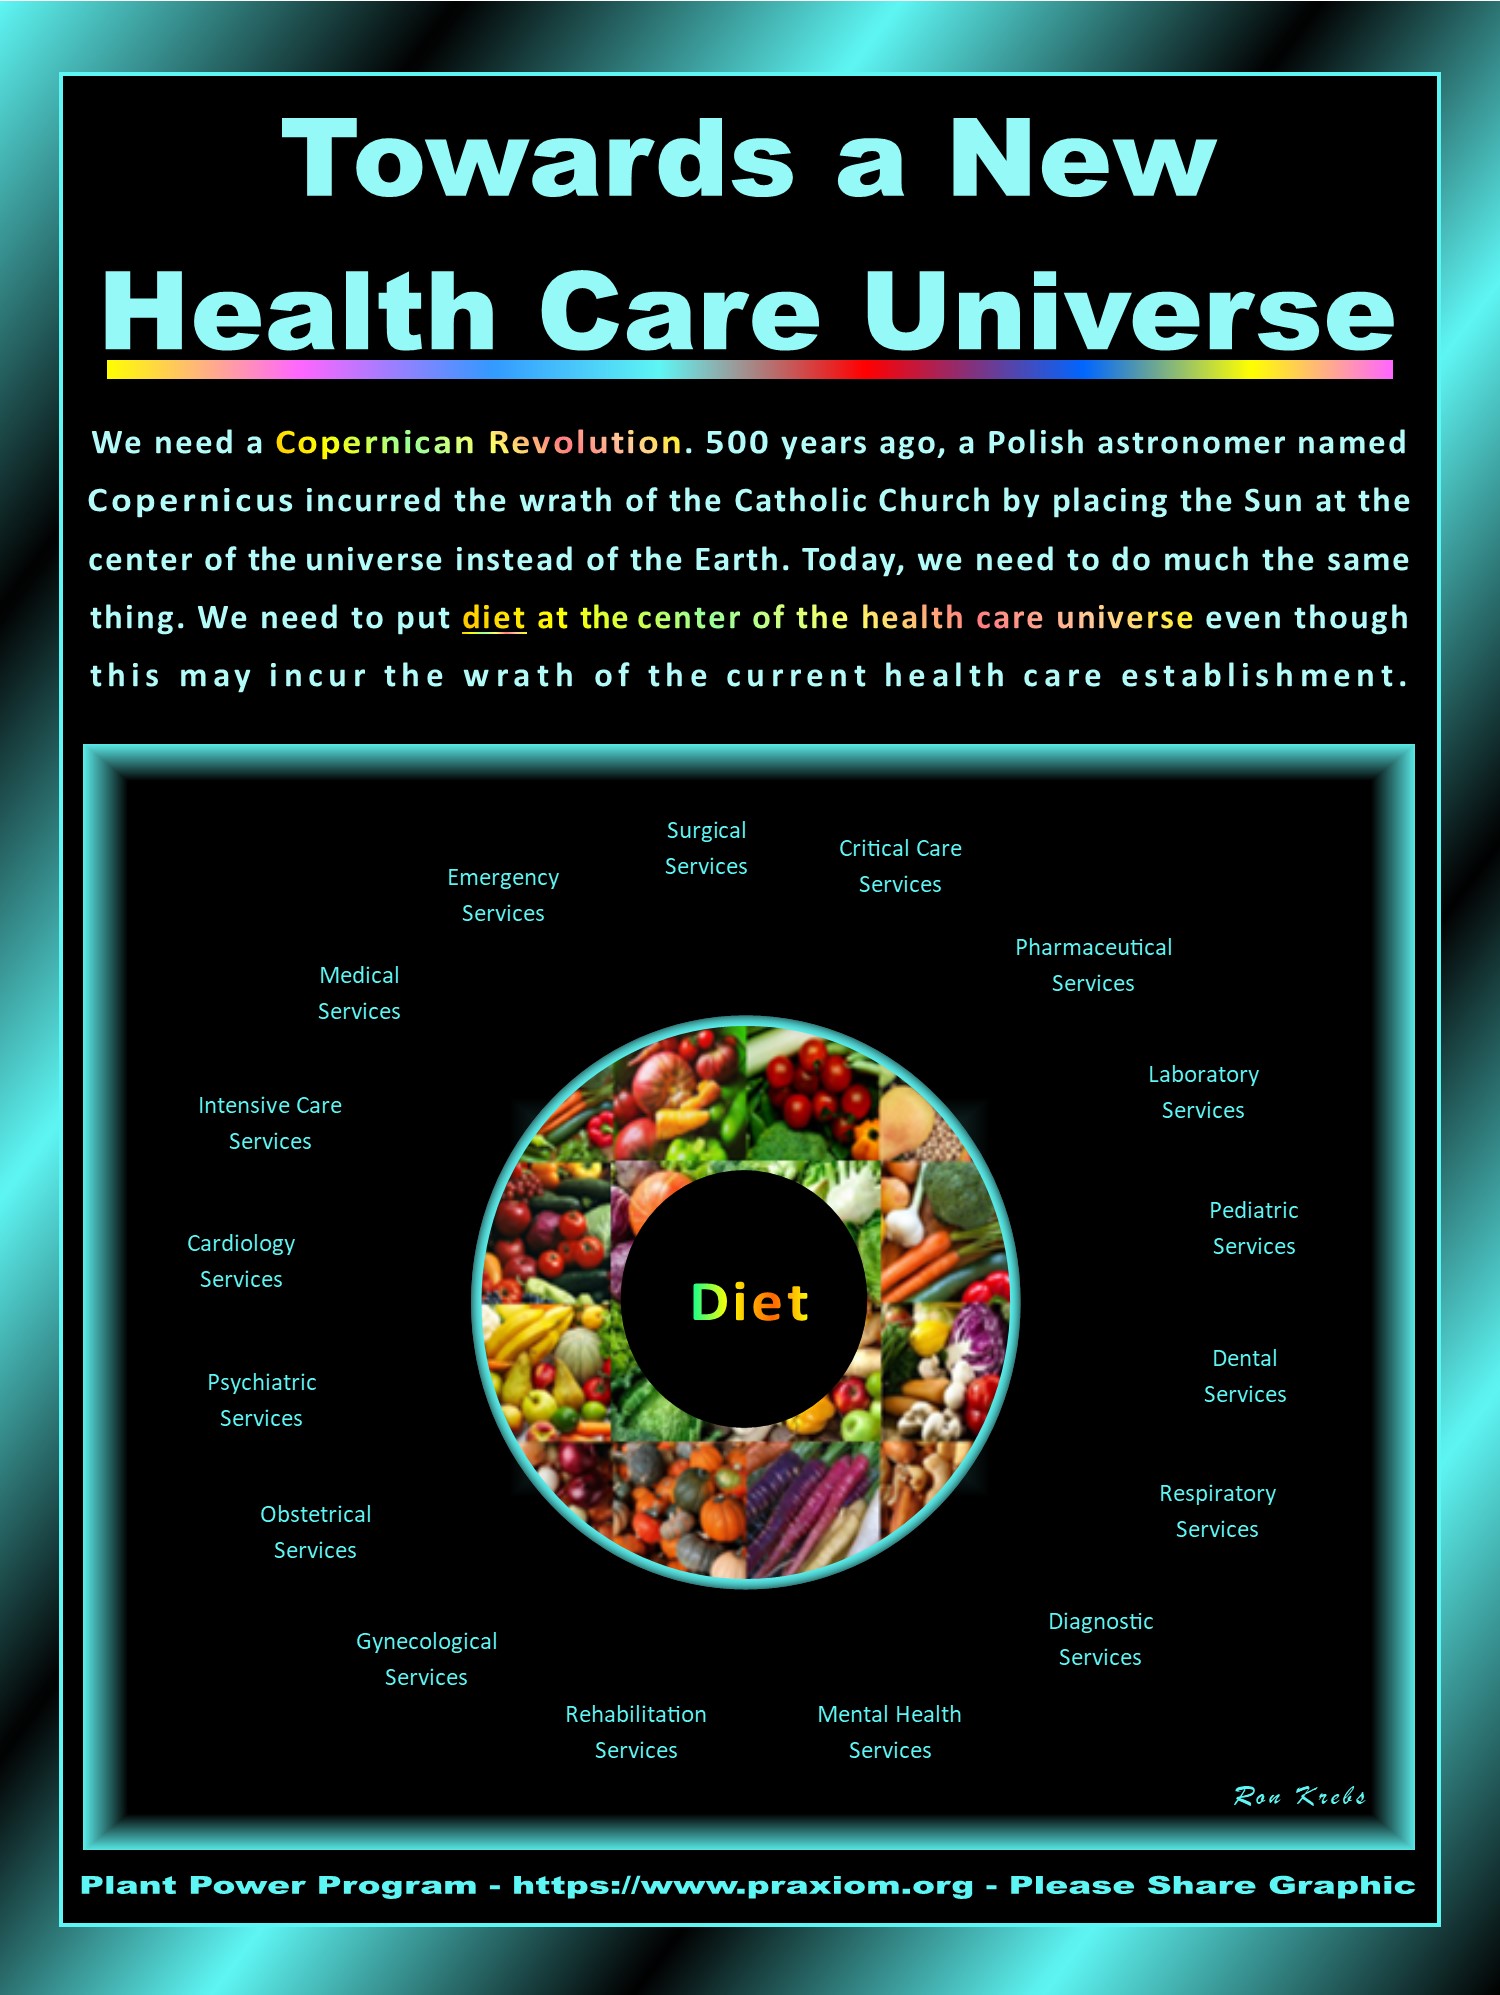 Towards a New Health Care Universe by Ron Krebs